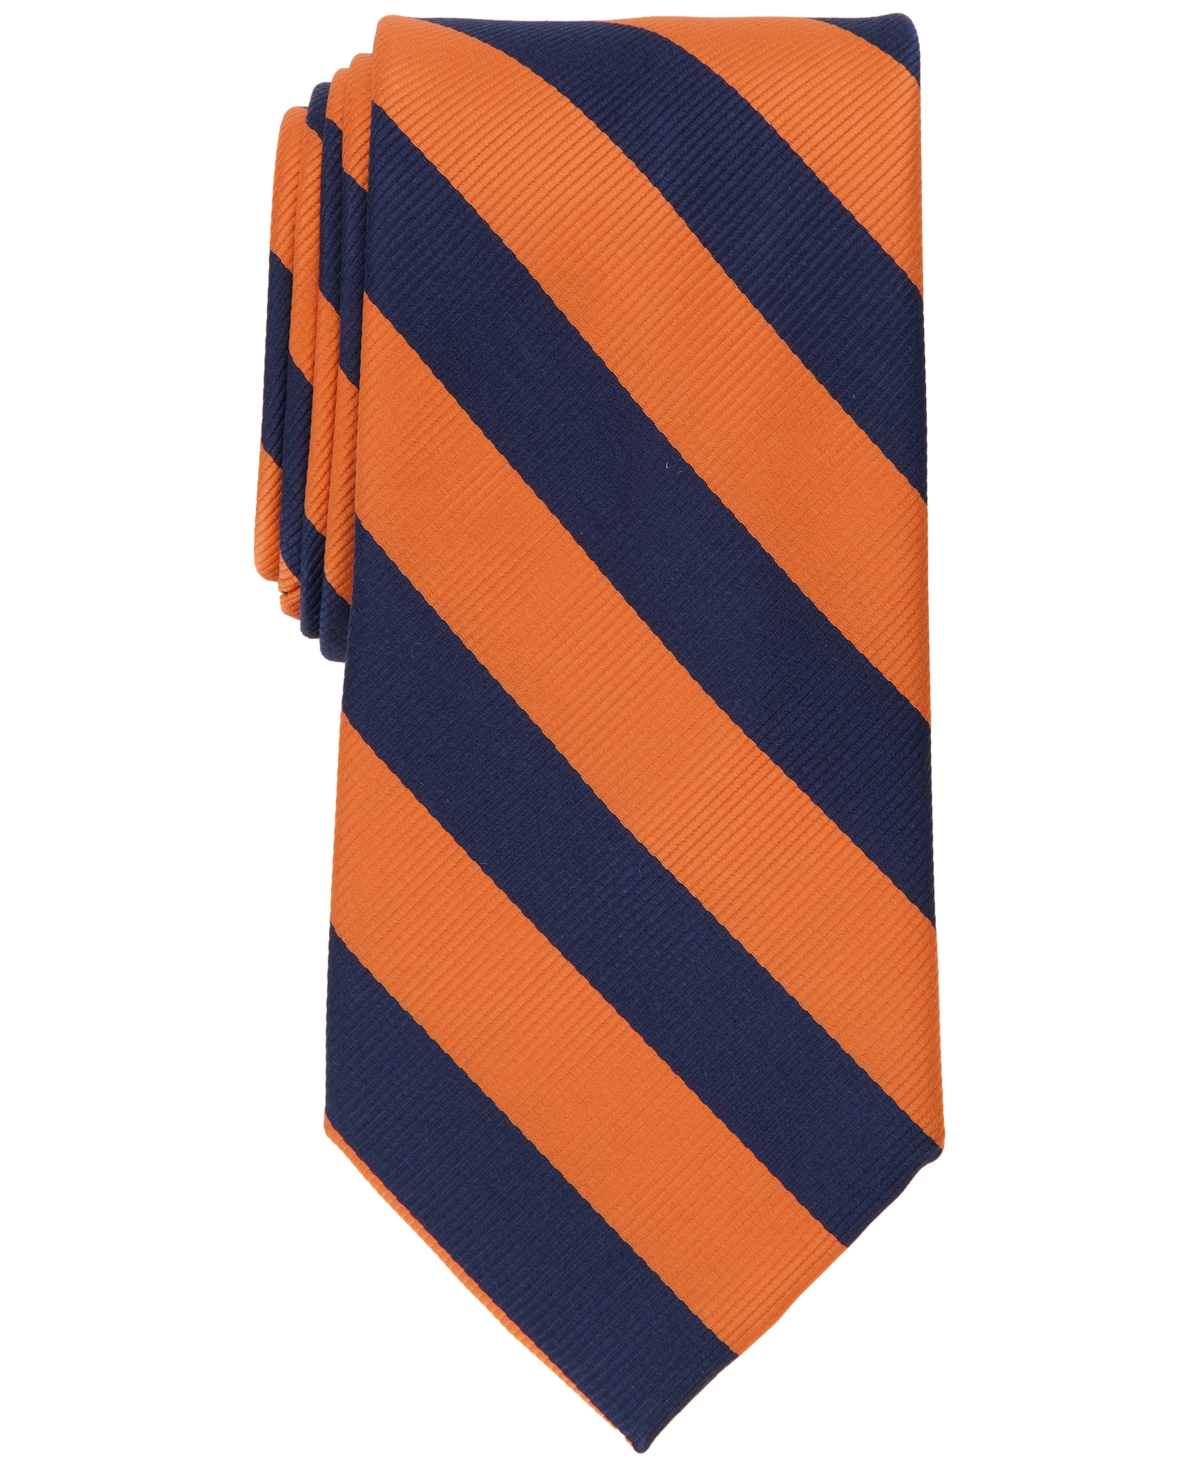 Men's Classic Stripe Tie, Created for Macy's - Taupe